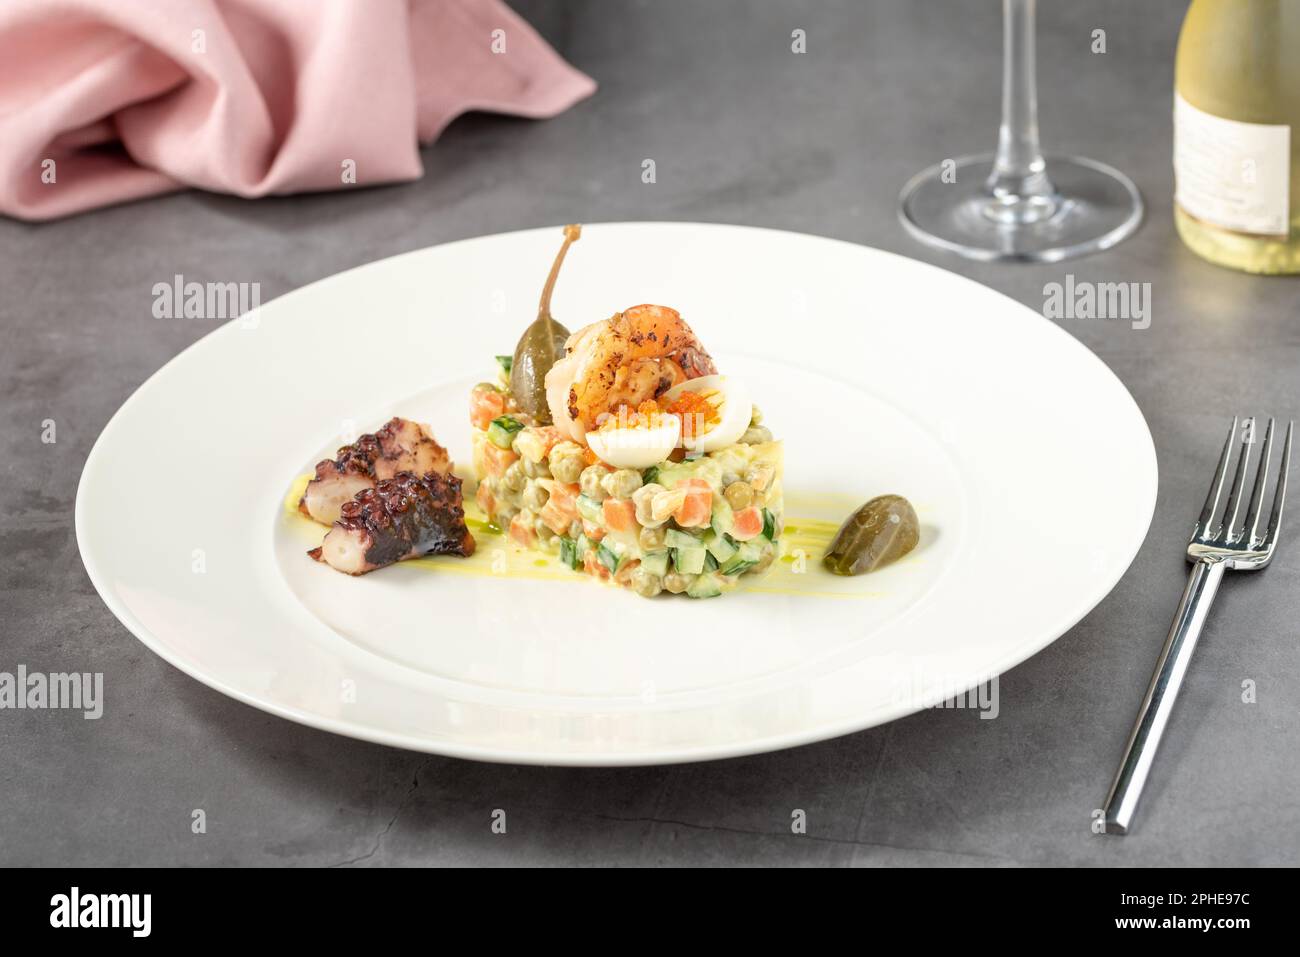 Russian salad with aioli sauce, shrimp, octopus and capers on a white porcelain plate Stock Photo